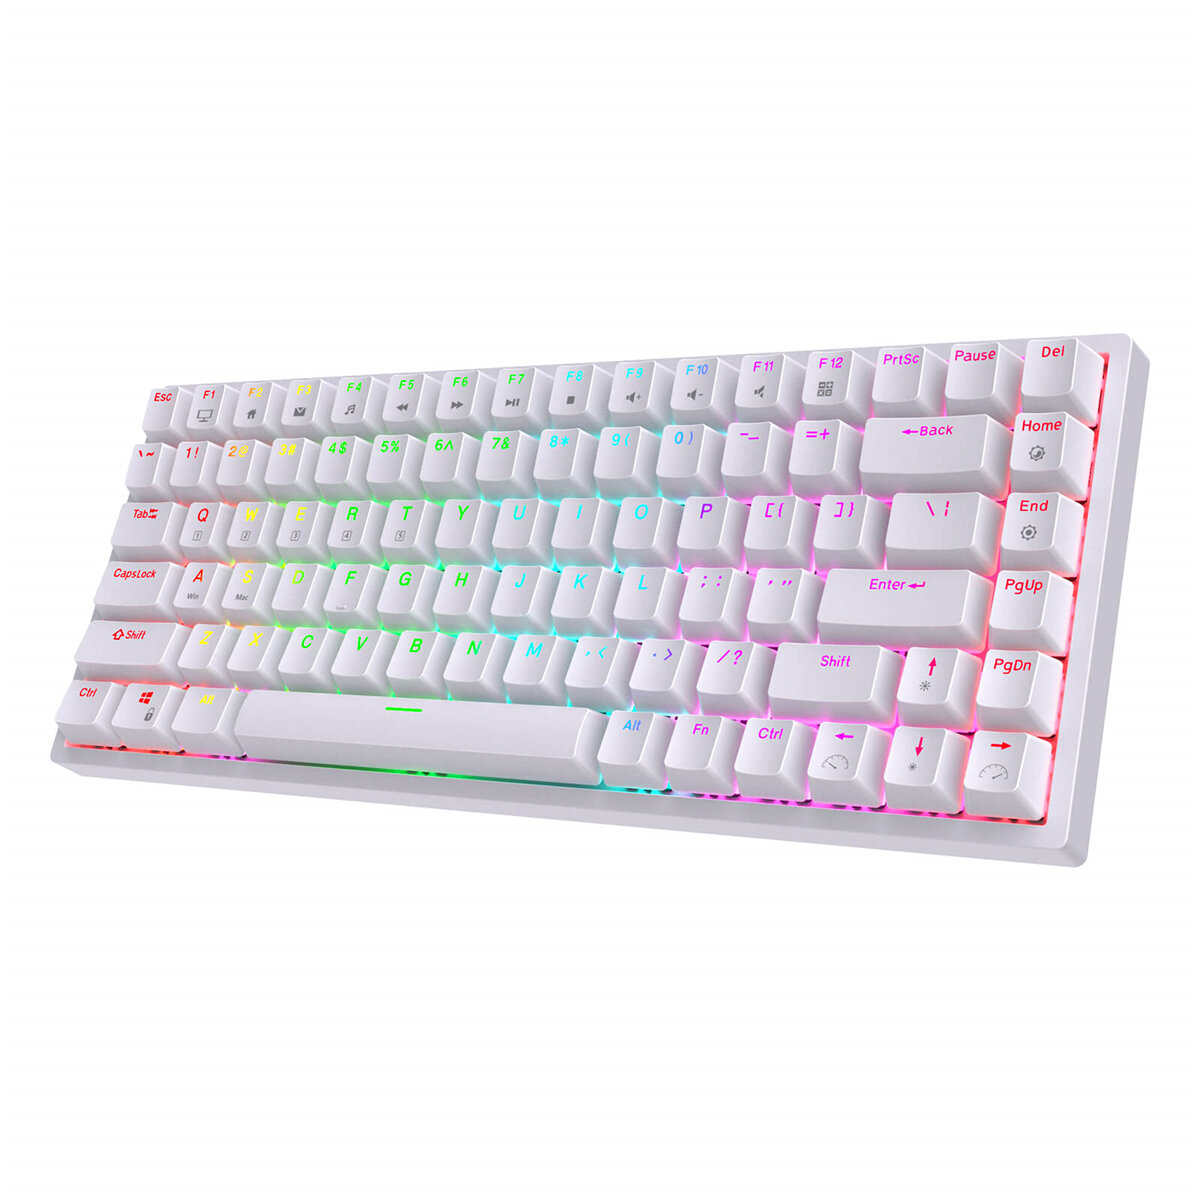 Royal Kludge RK84 Mechanical Keyboard 84 Keys Triple Mode Wireless bluetooth5.0 + 2.4Ghz + Type-C Wired Hot-swappable RK Switch USB Hub Rechargeable RGB Backlit ABS Keycaps Gaming Keyboard